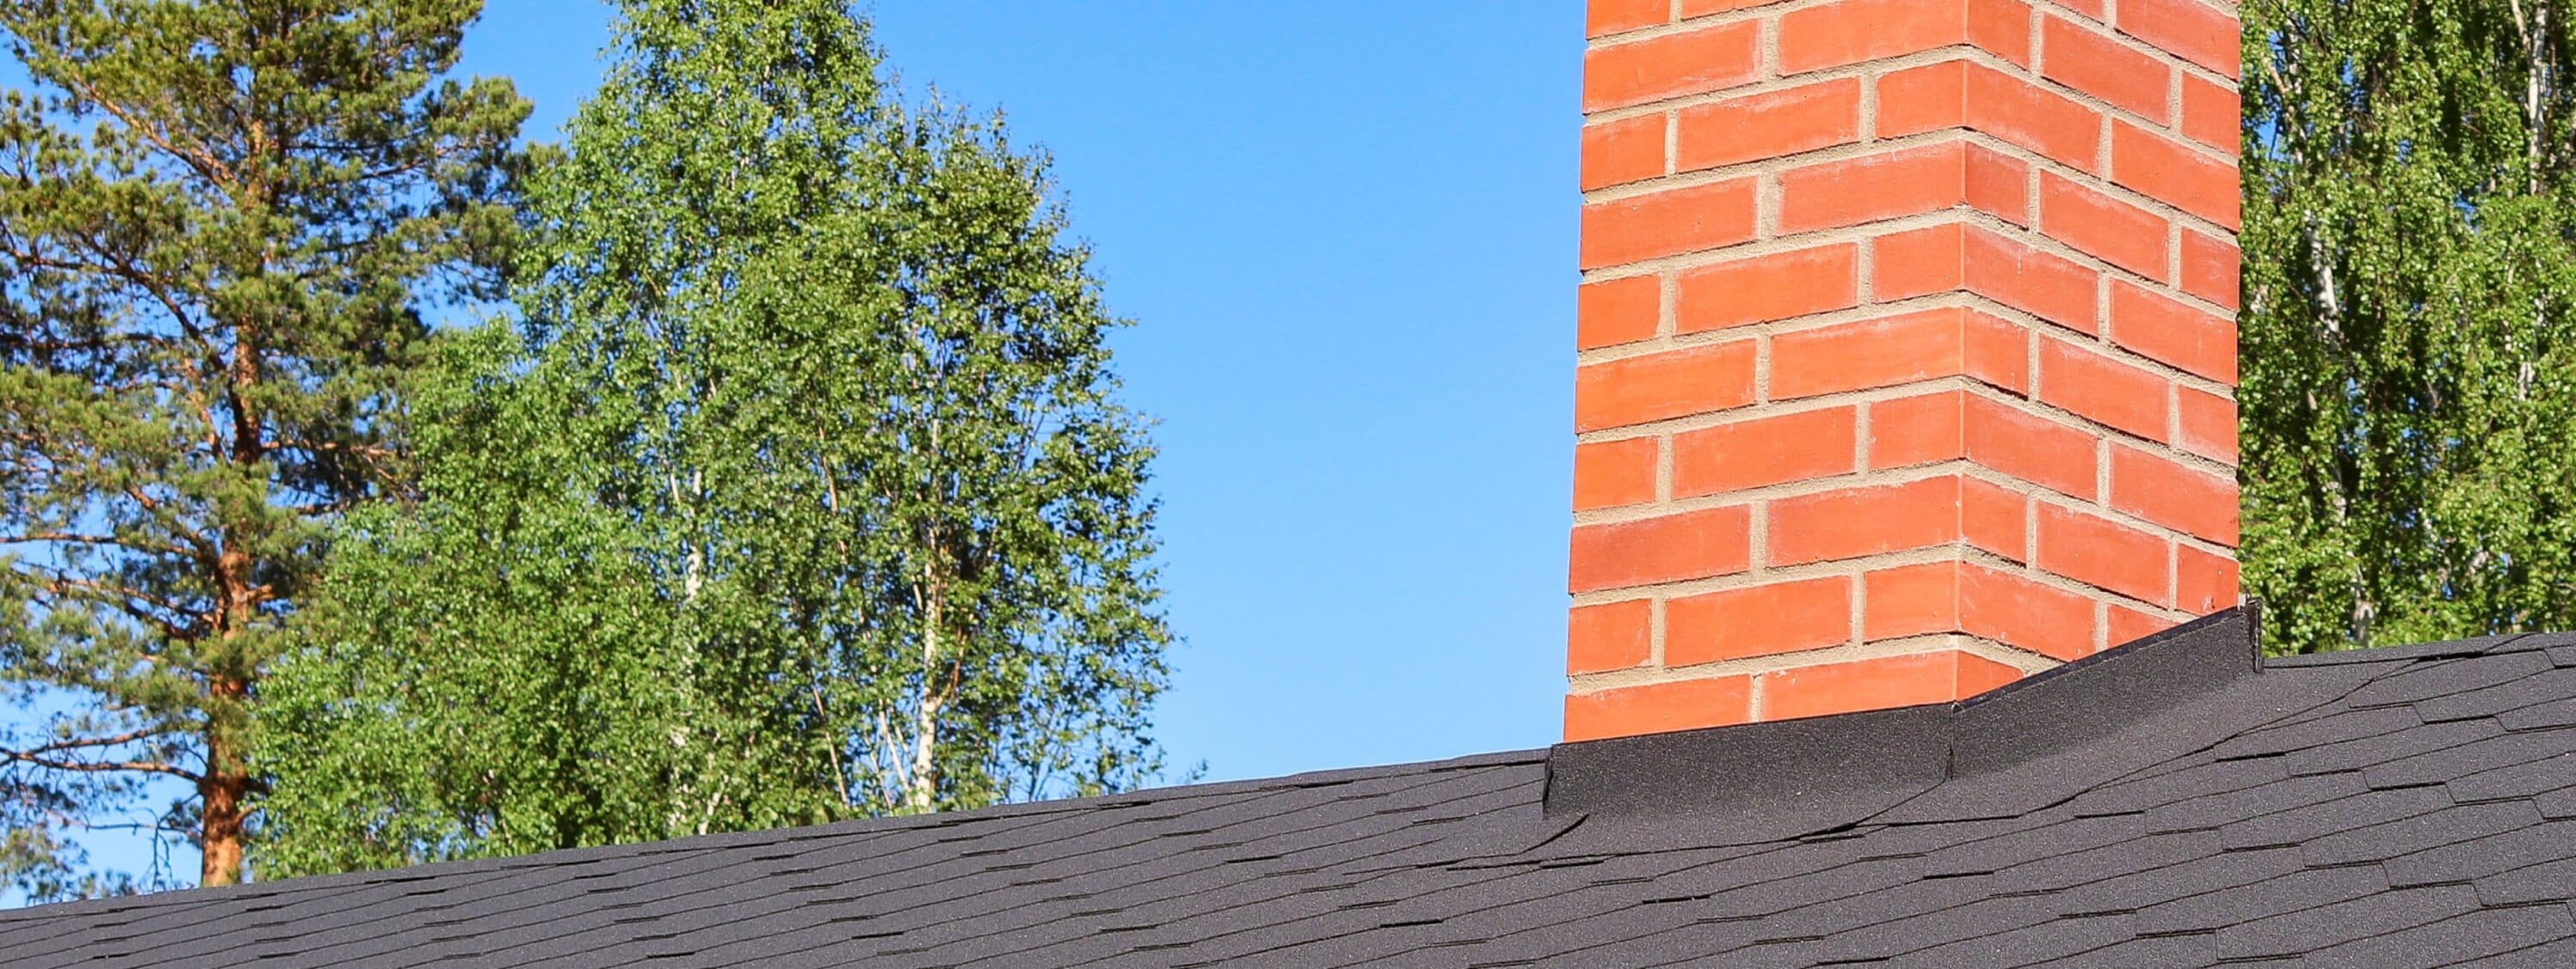 Image of Roof with Chimney